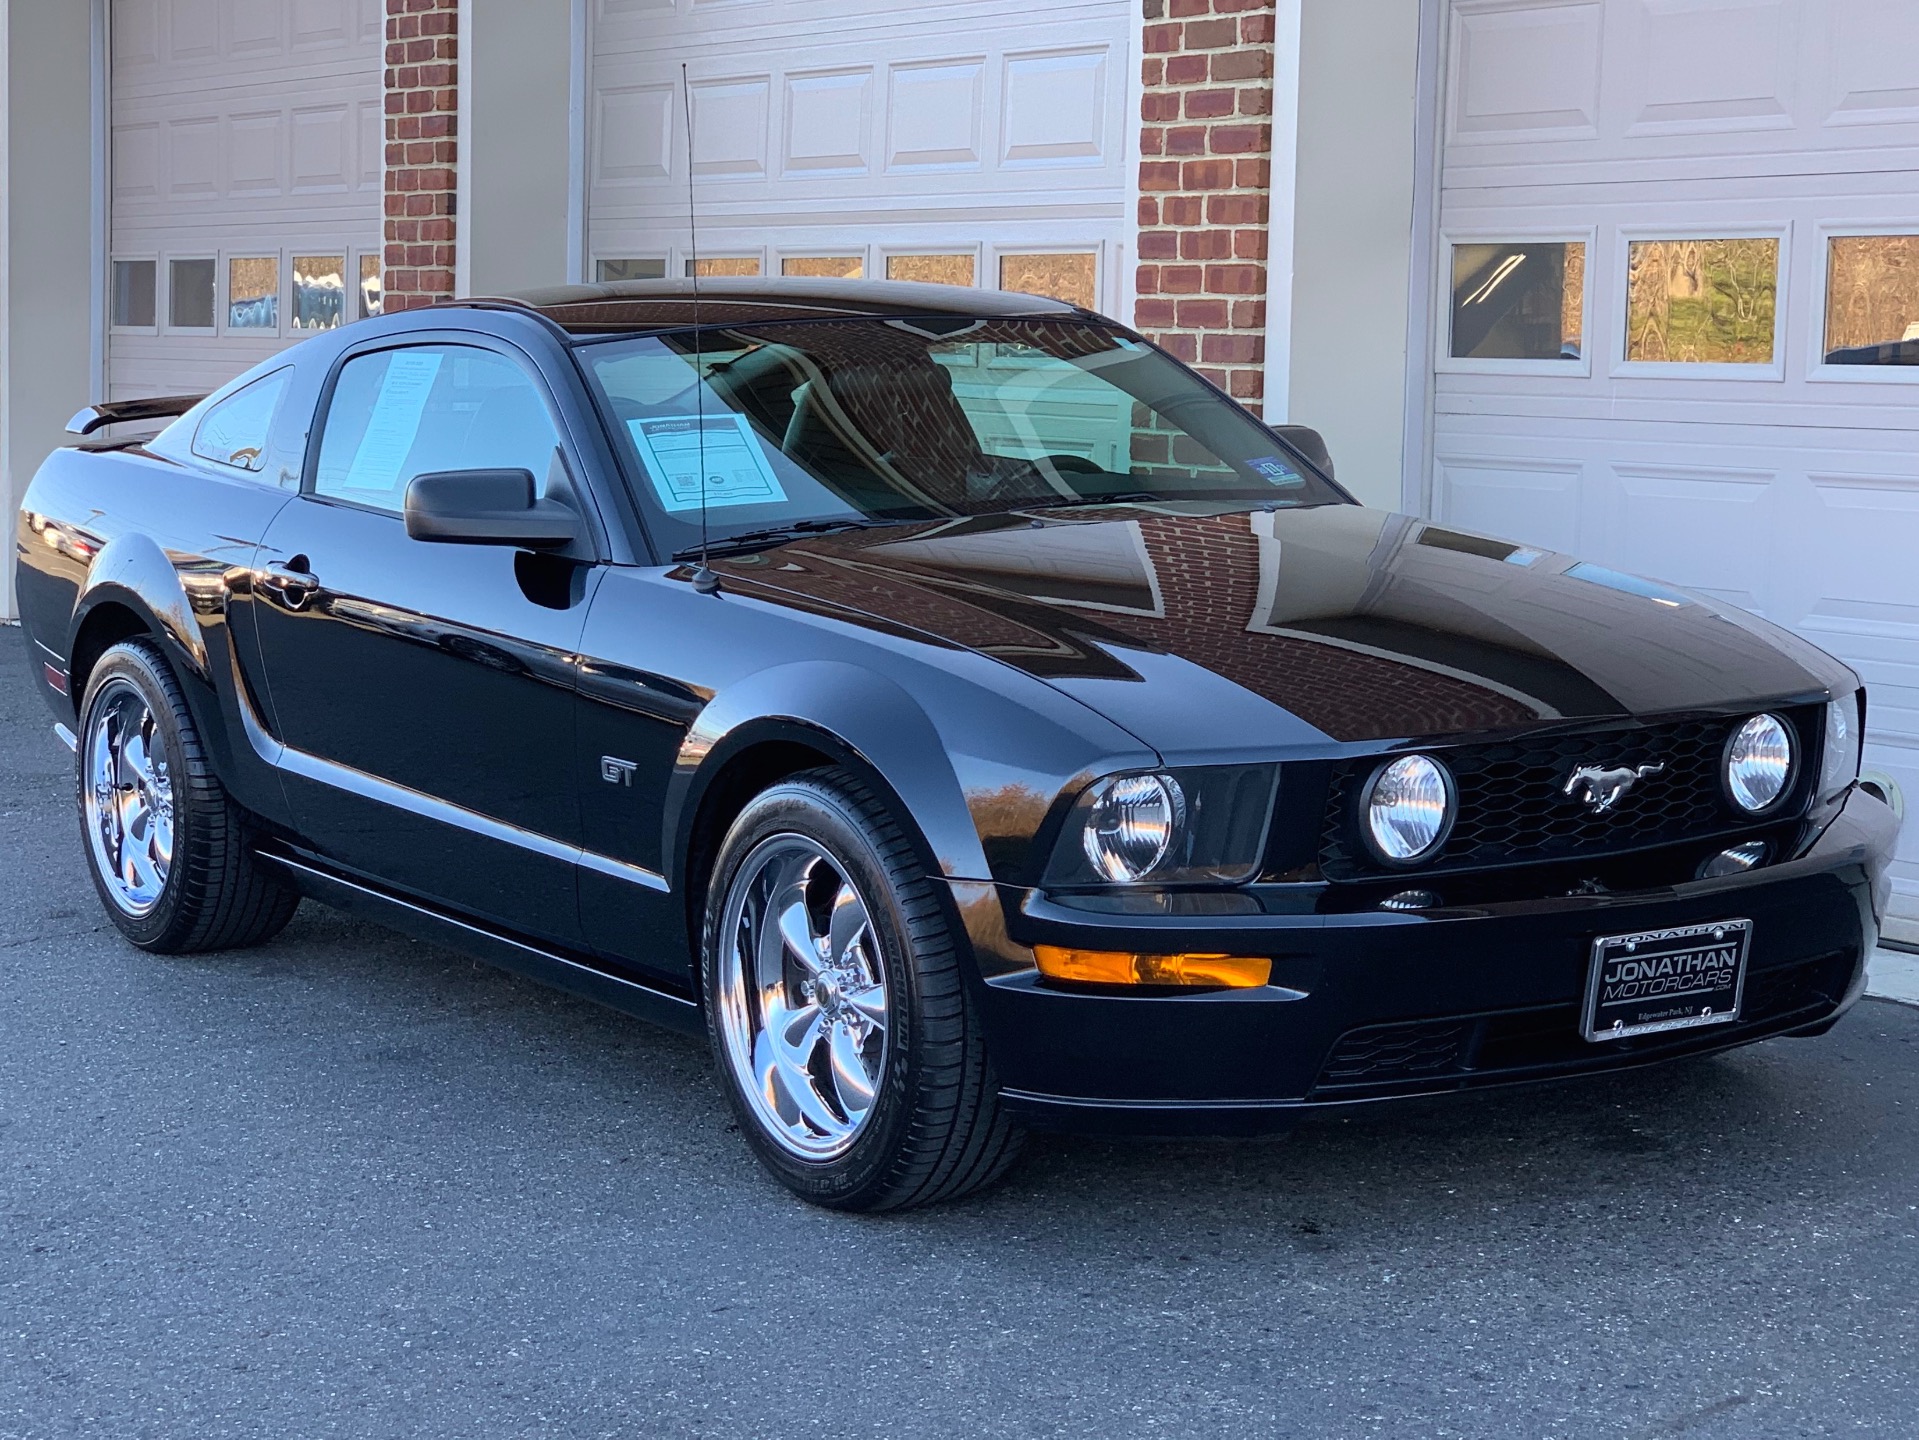  2005  Ford  Mustang  GT Premium Stock 248509 for sale near 